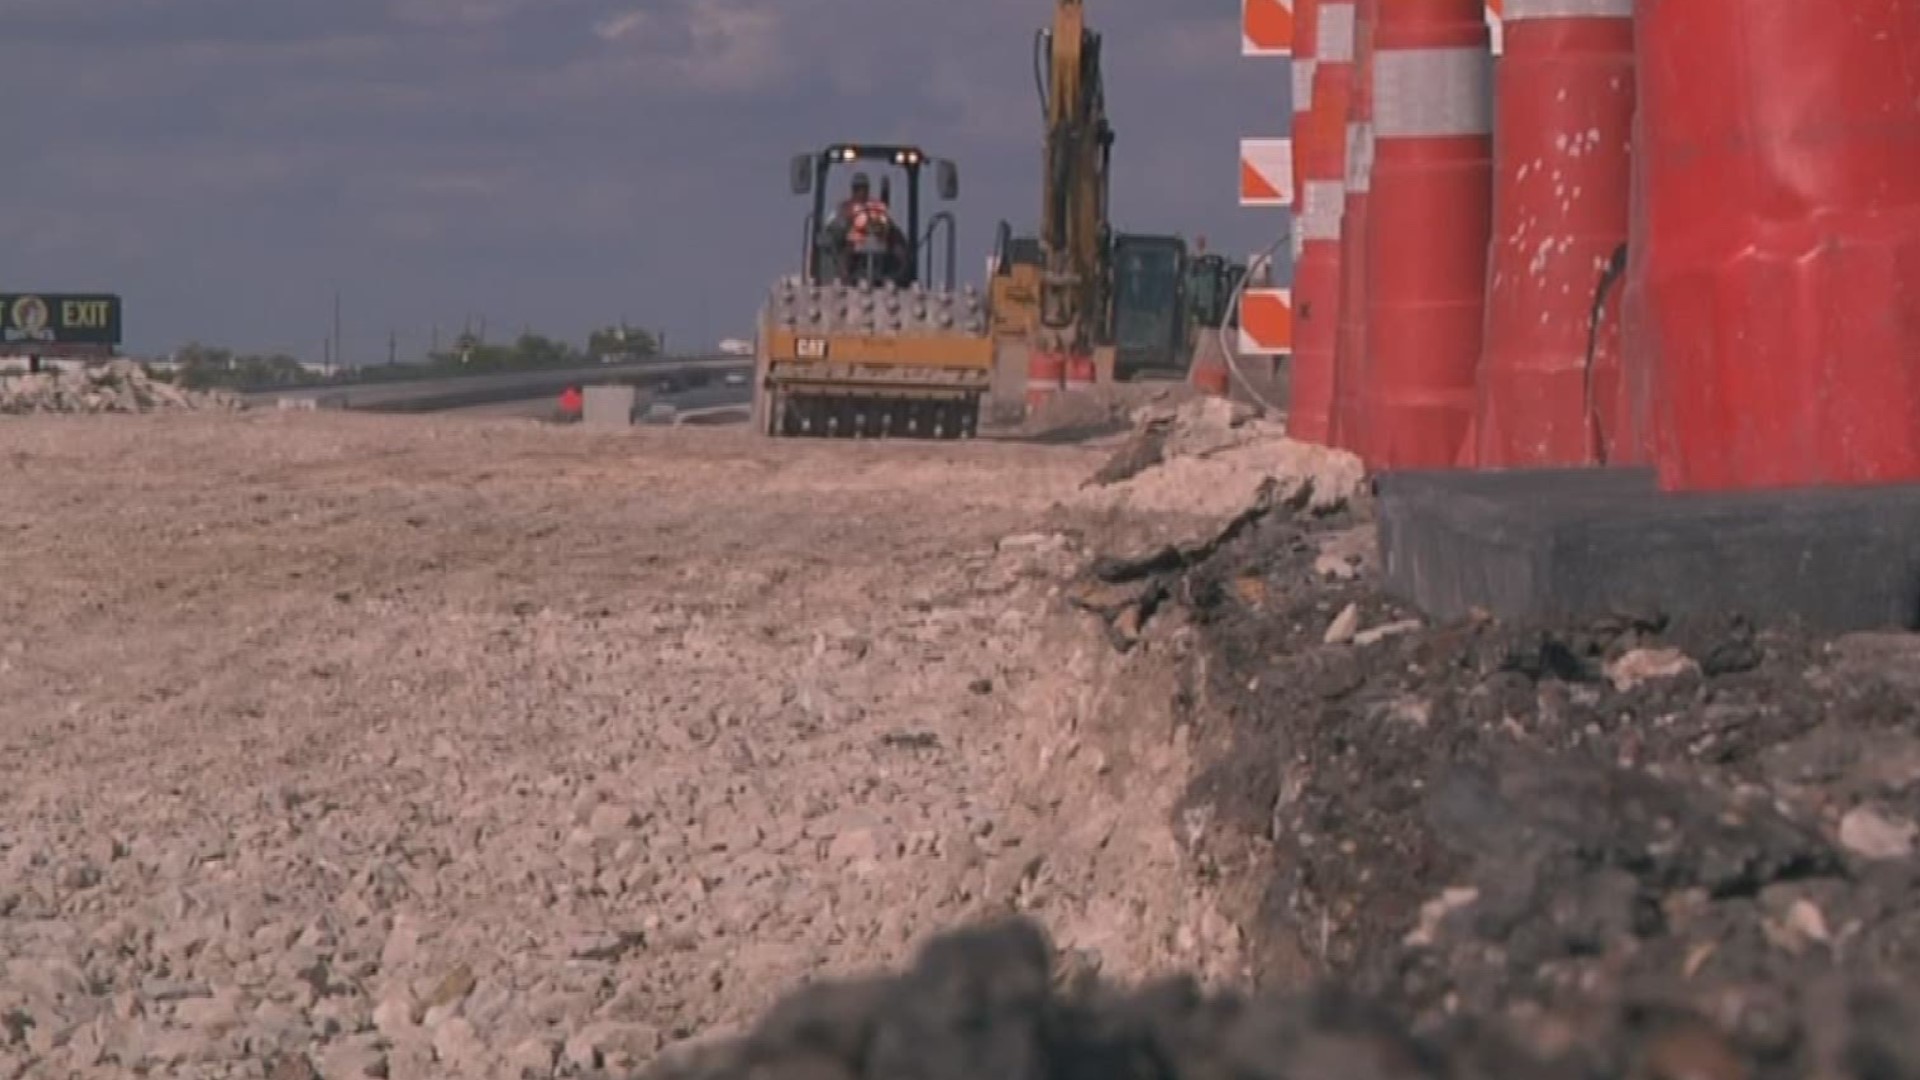 There's a detour on I-35 in Waco expected to last about a year, according to TxDOT as part of a $341 million project.